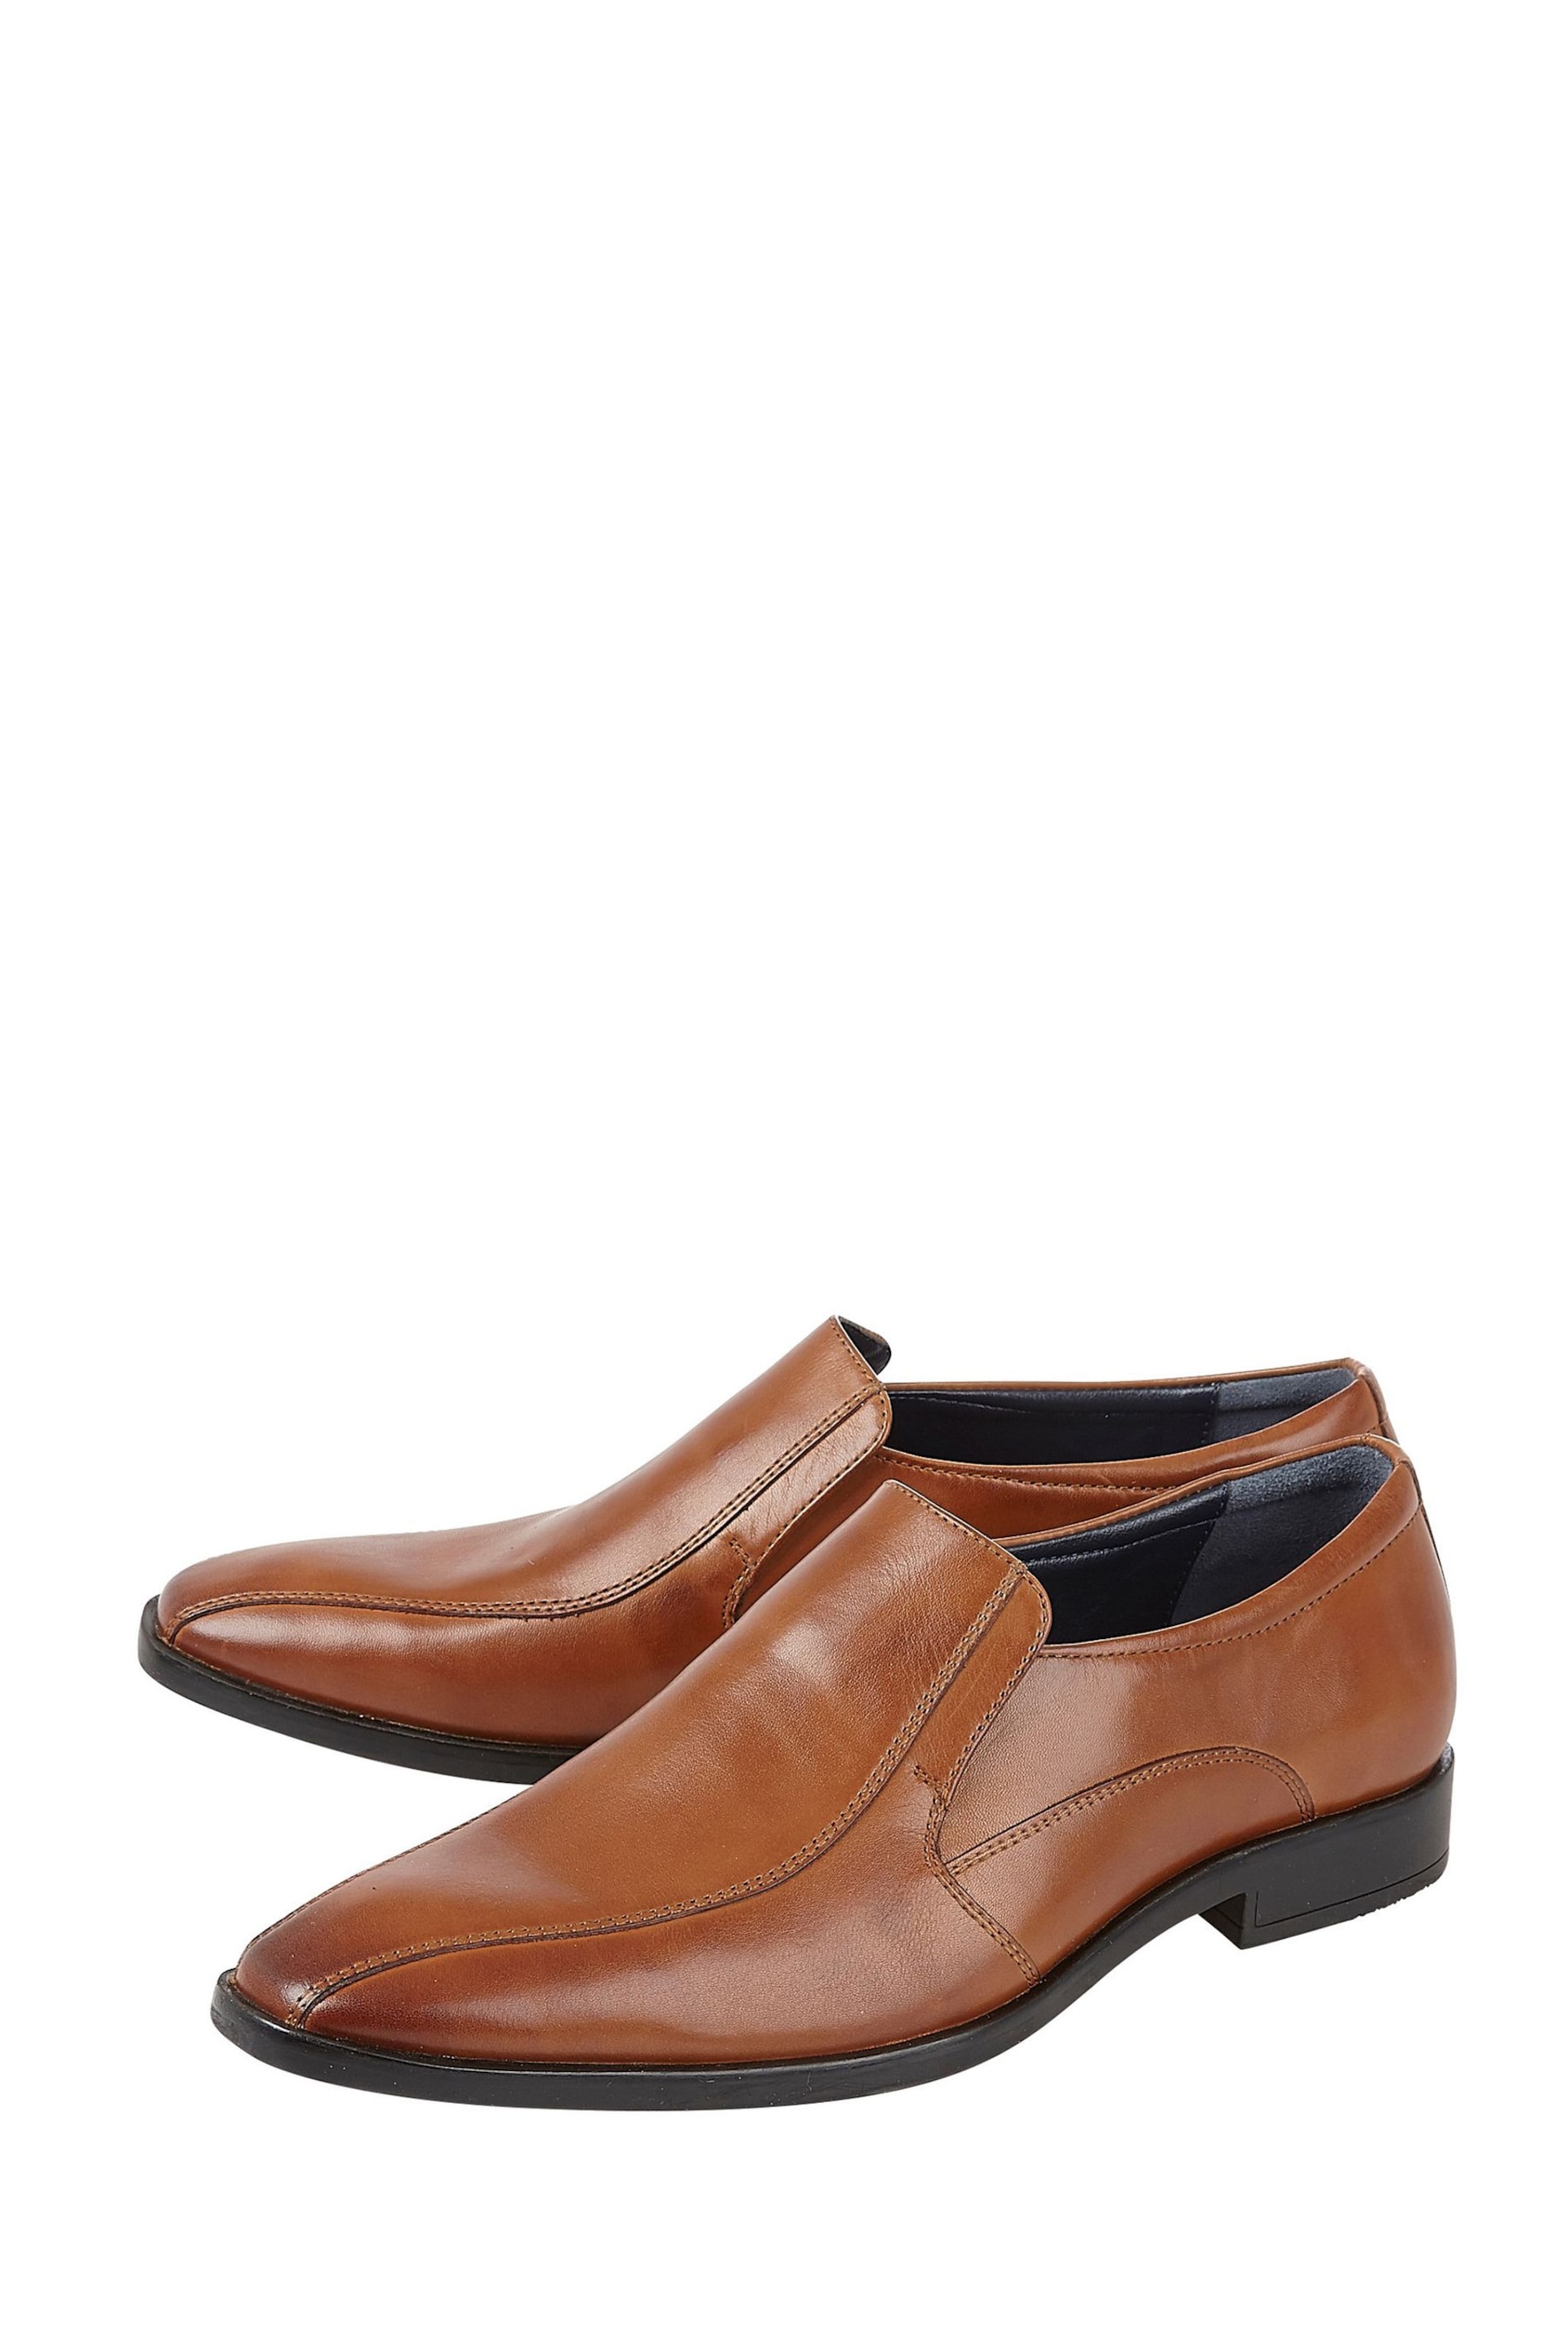 Lotus Brown Leather Loafers - Image 2 of 4